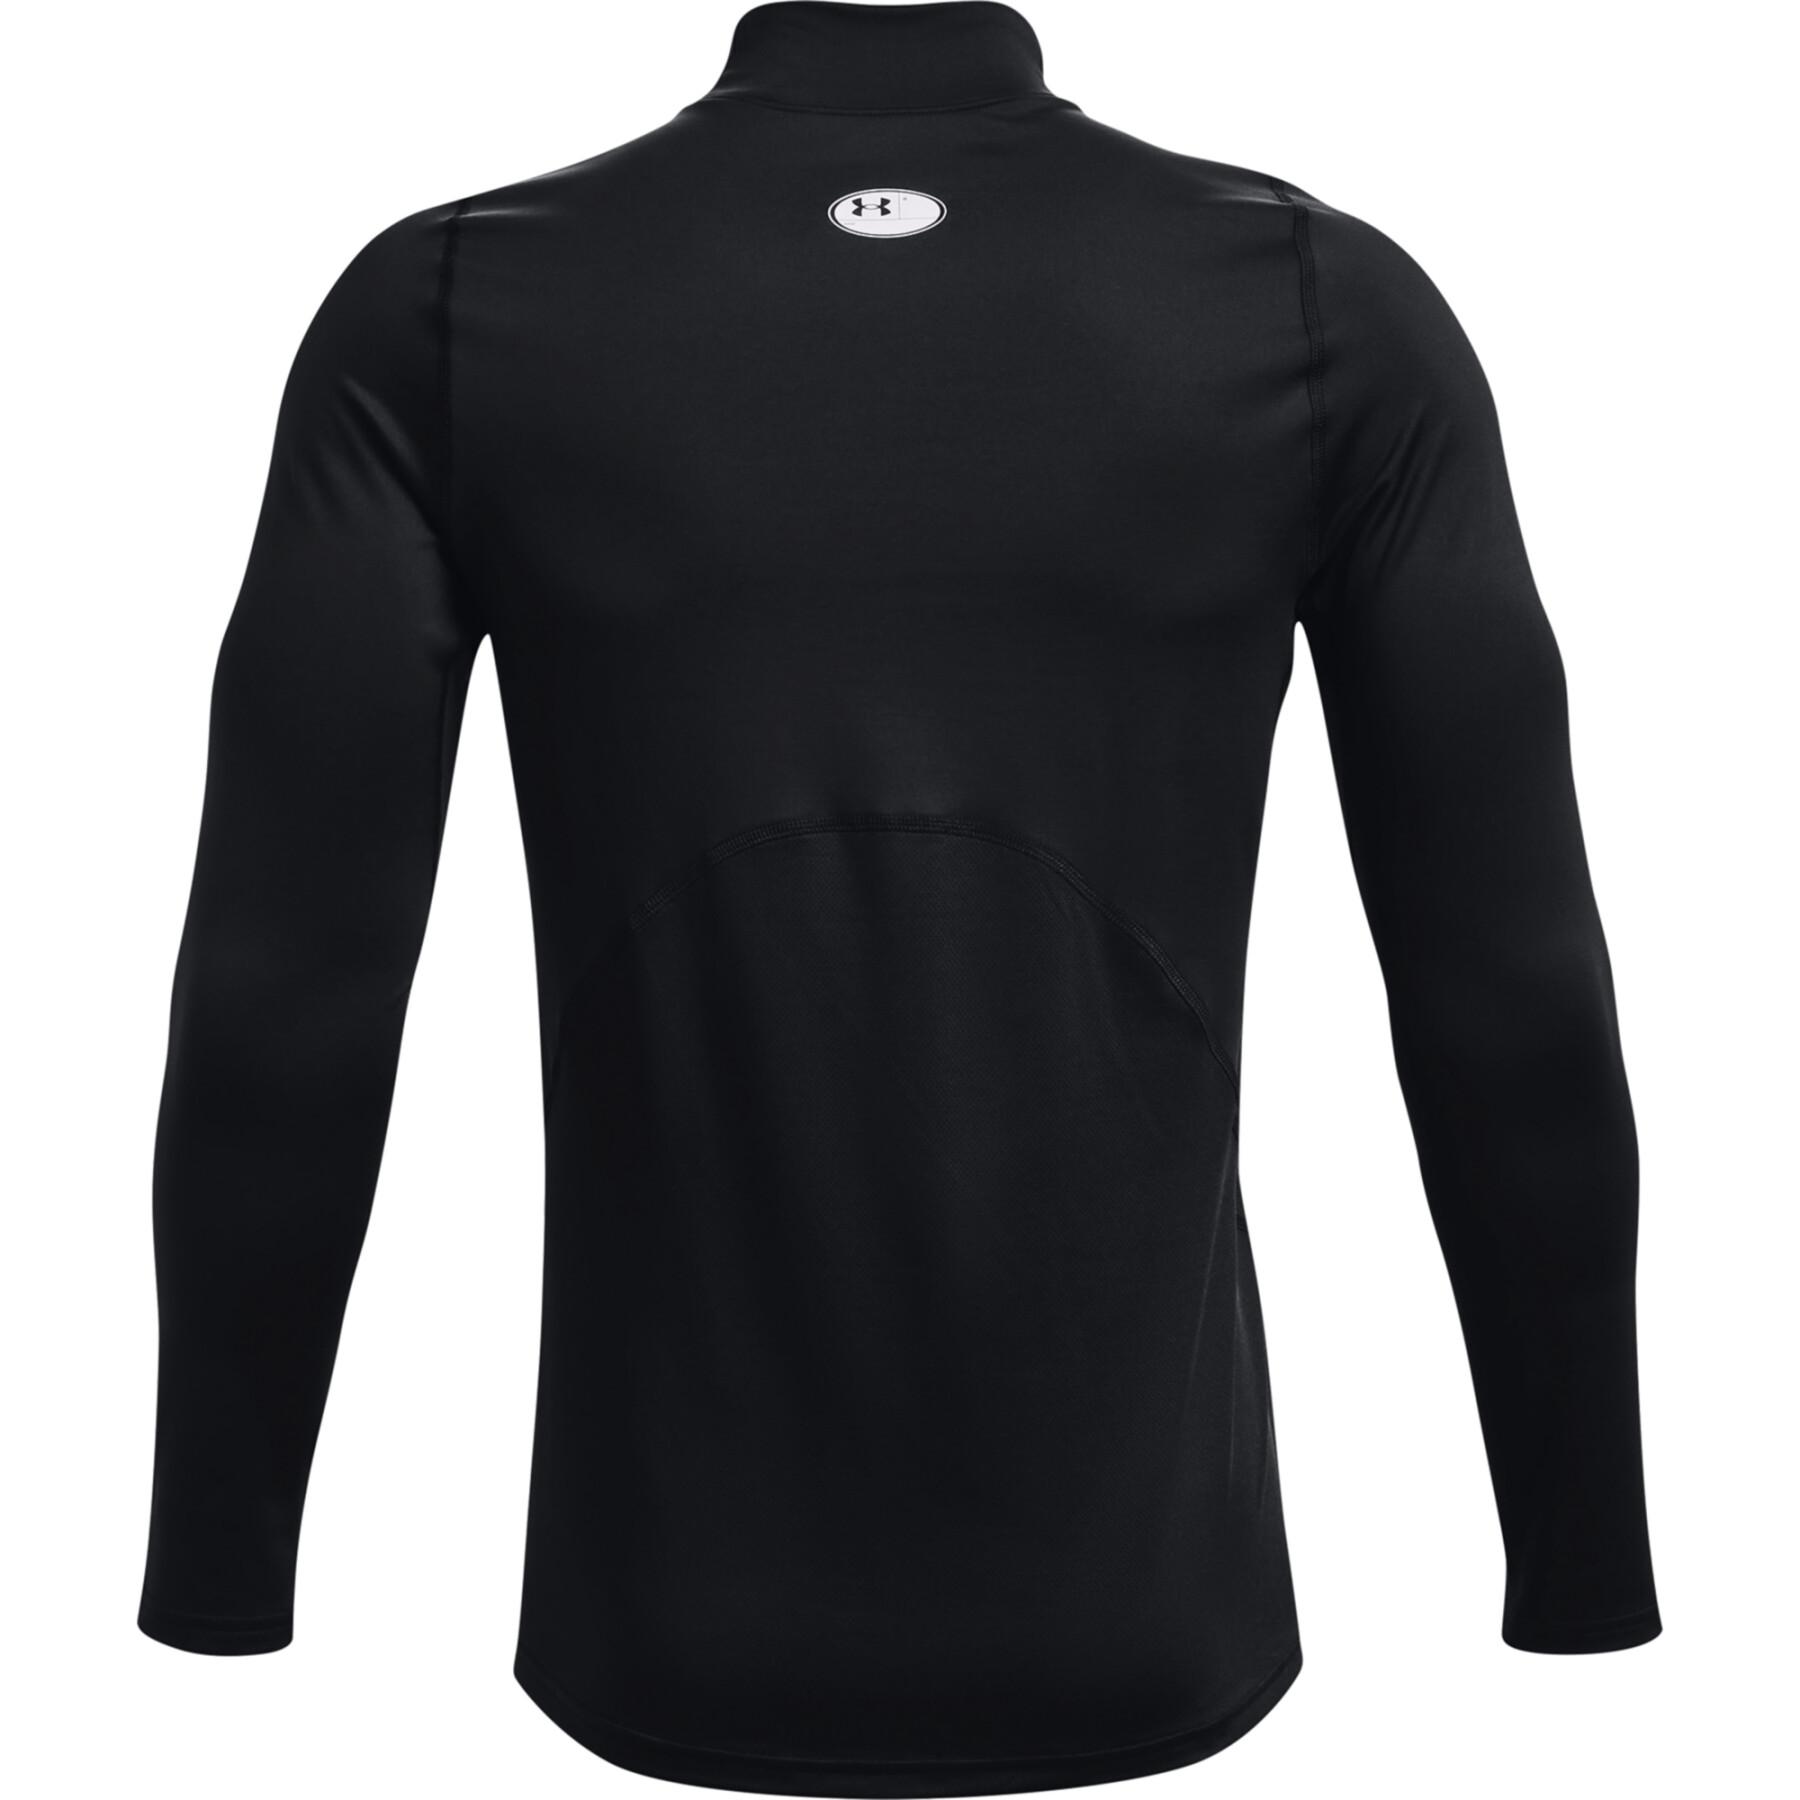 Fitted high neck undershirt Under Armour ColdGear®